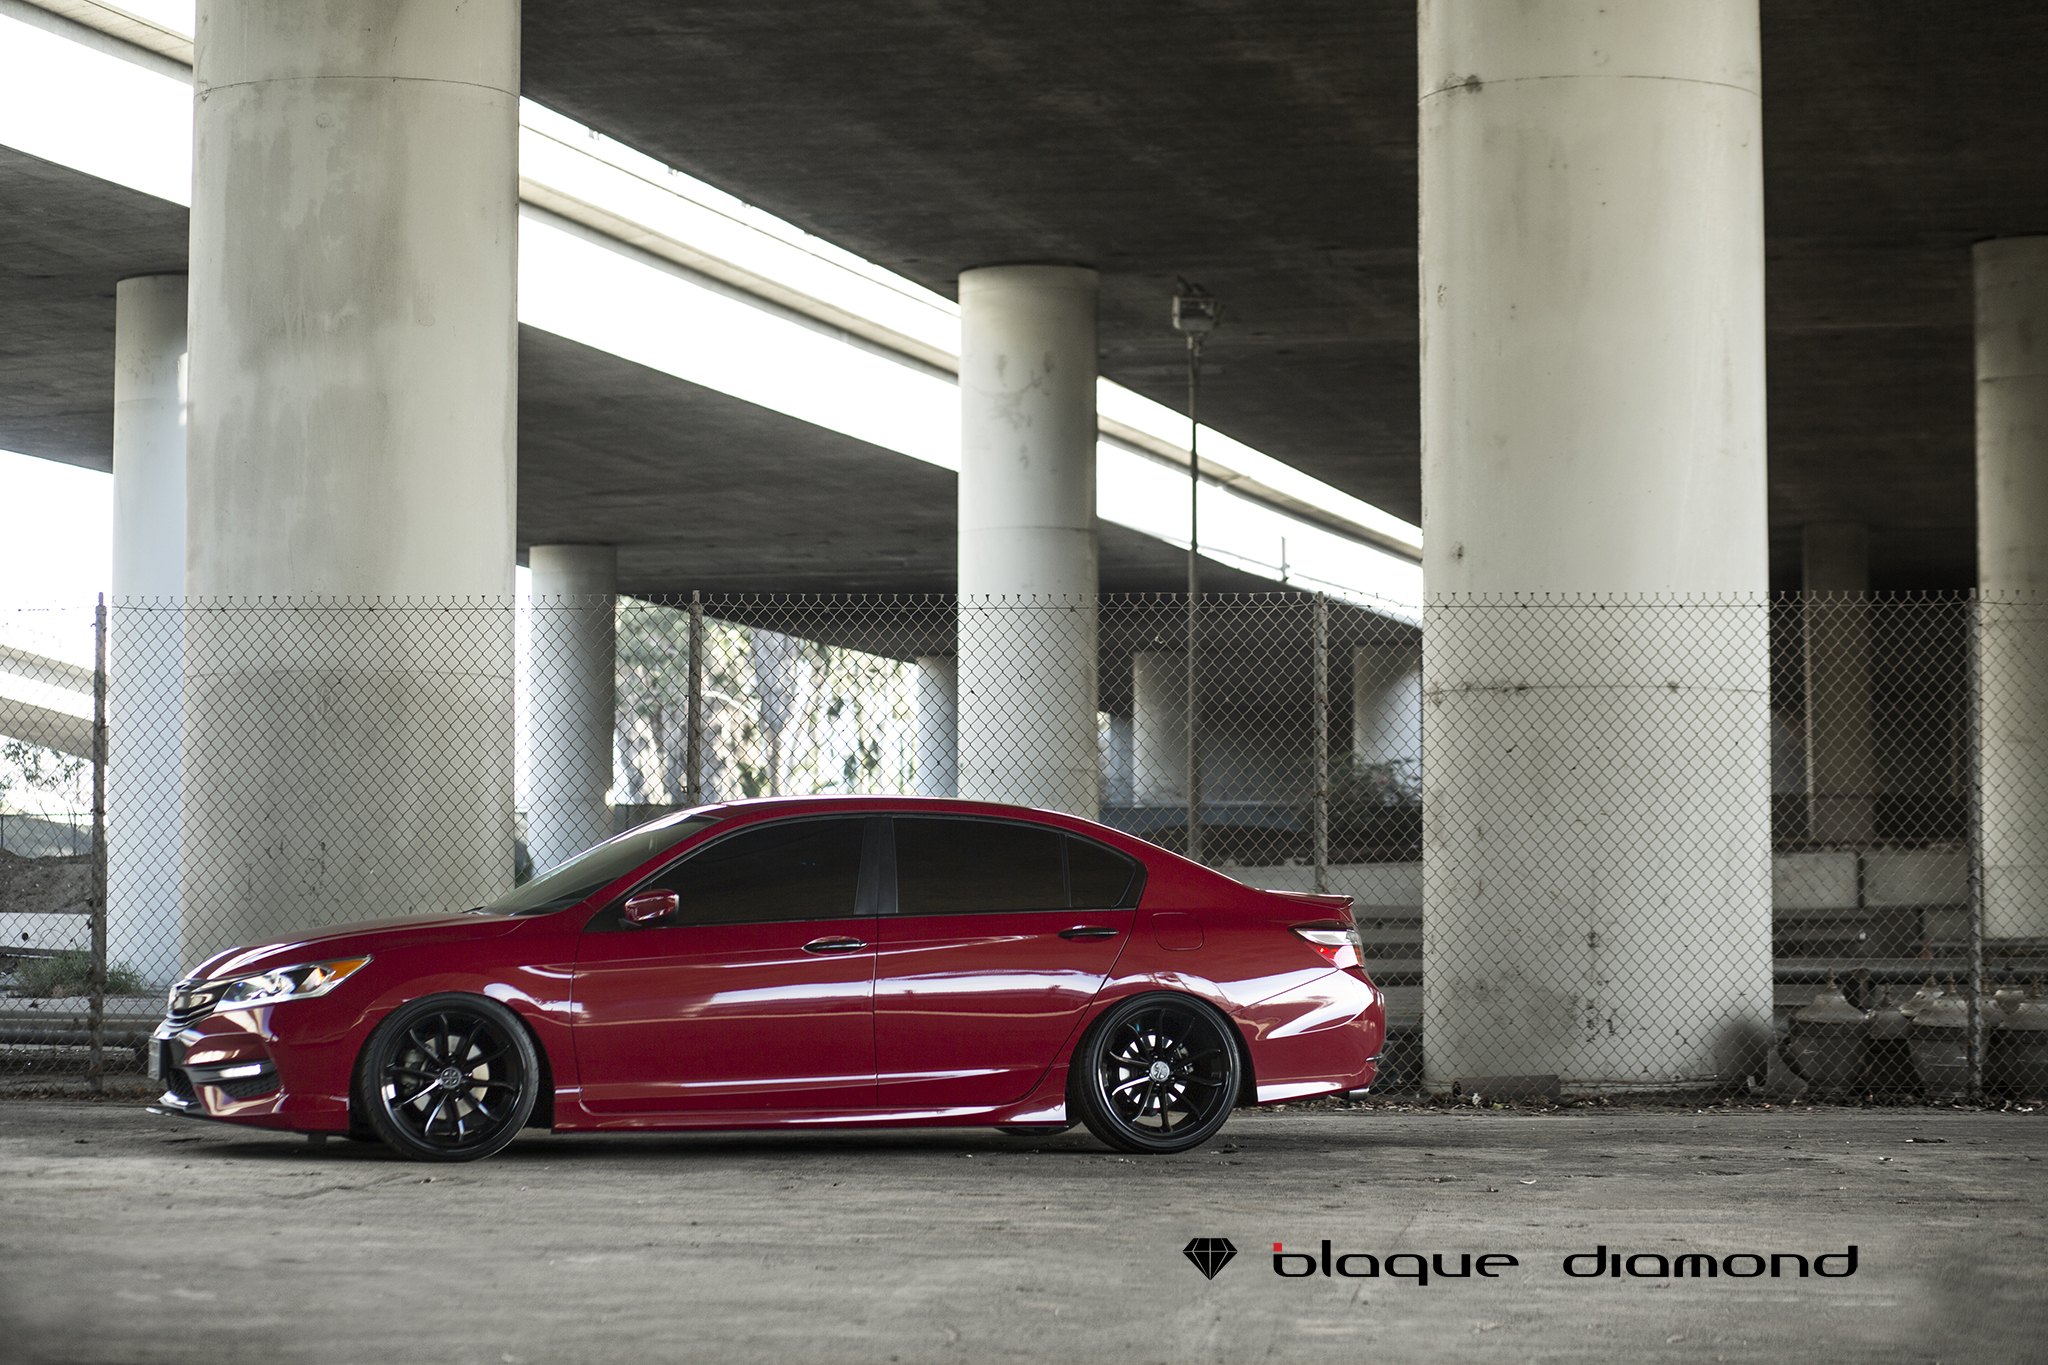 Aftermarket Side Skirts on Red Honda Accord - Photo by Blaque Diamond Wheels